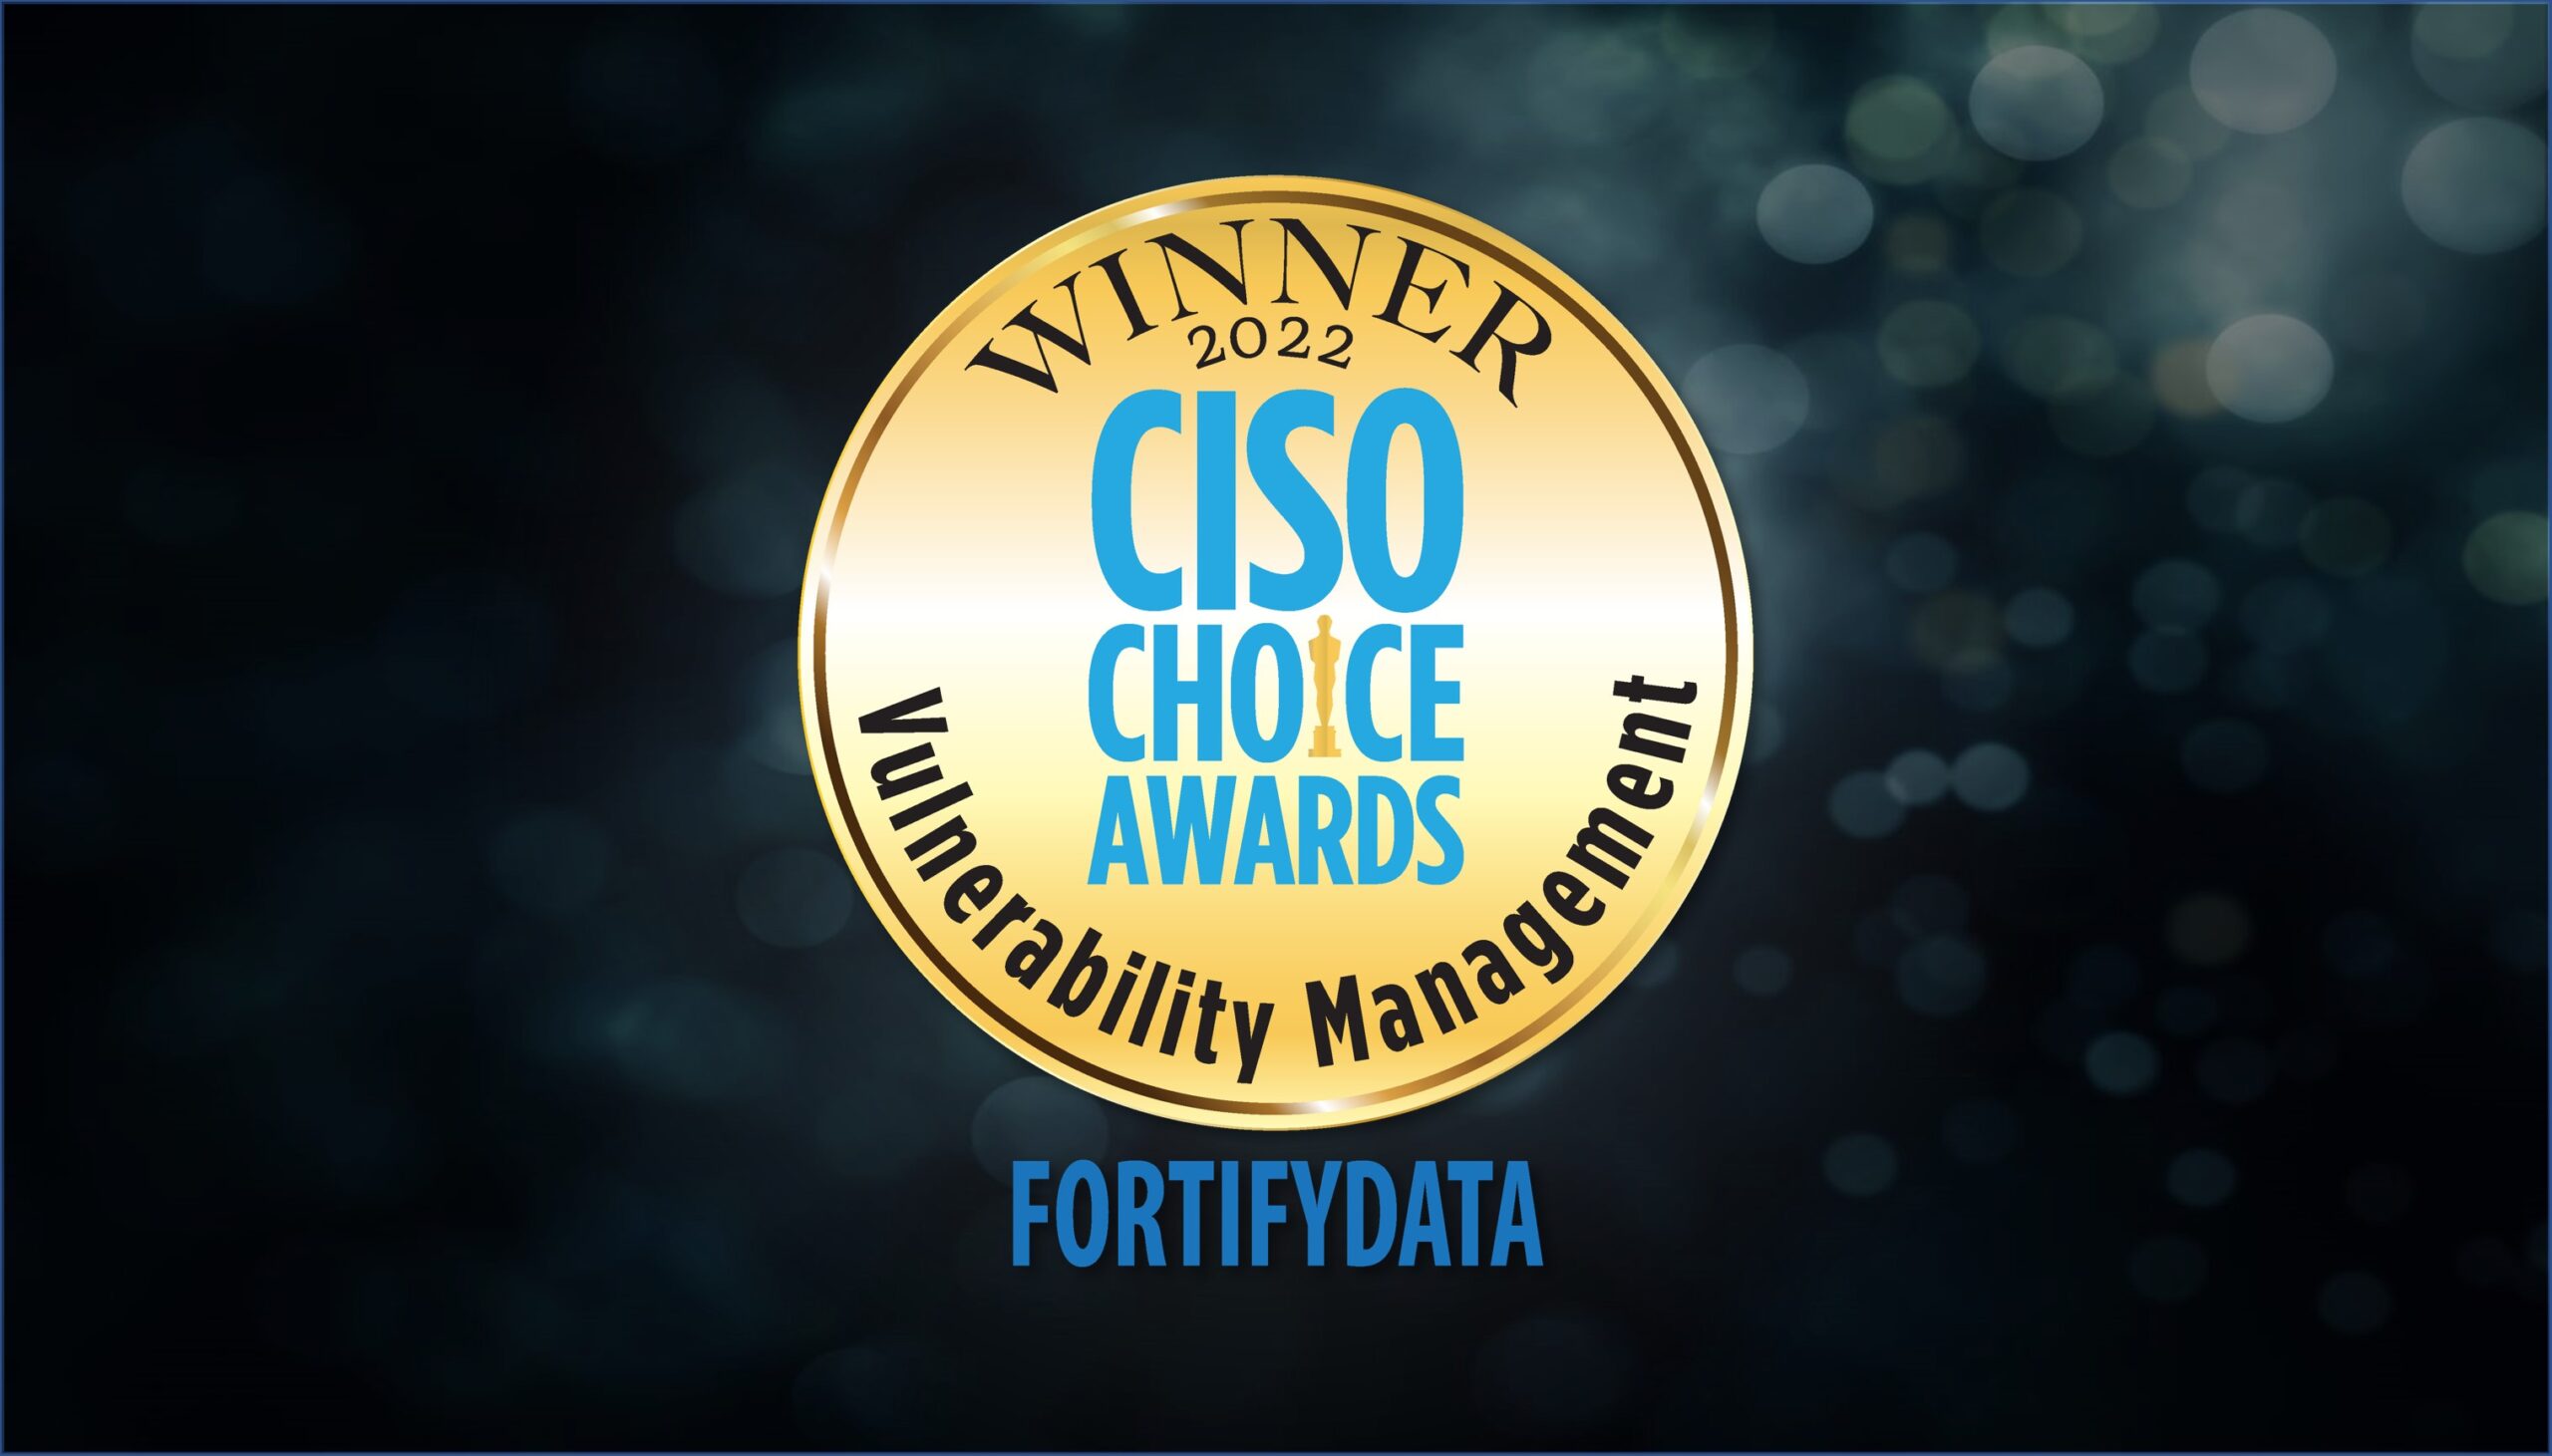 FortifyData Wins the 2022 CISO Choice Awards for Vulnerability